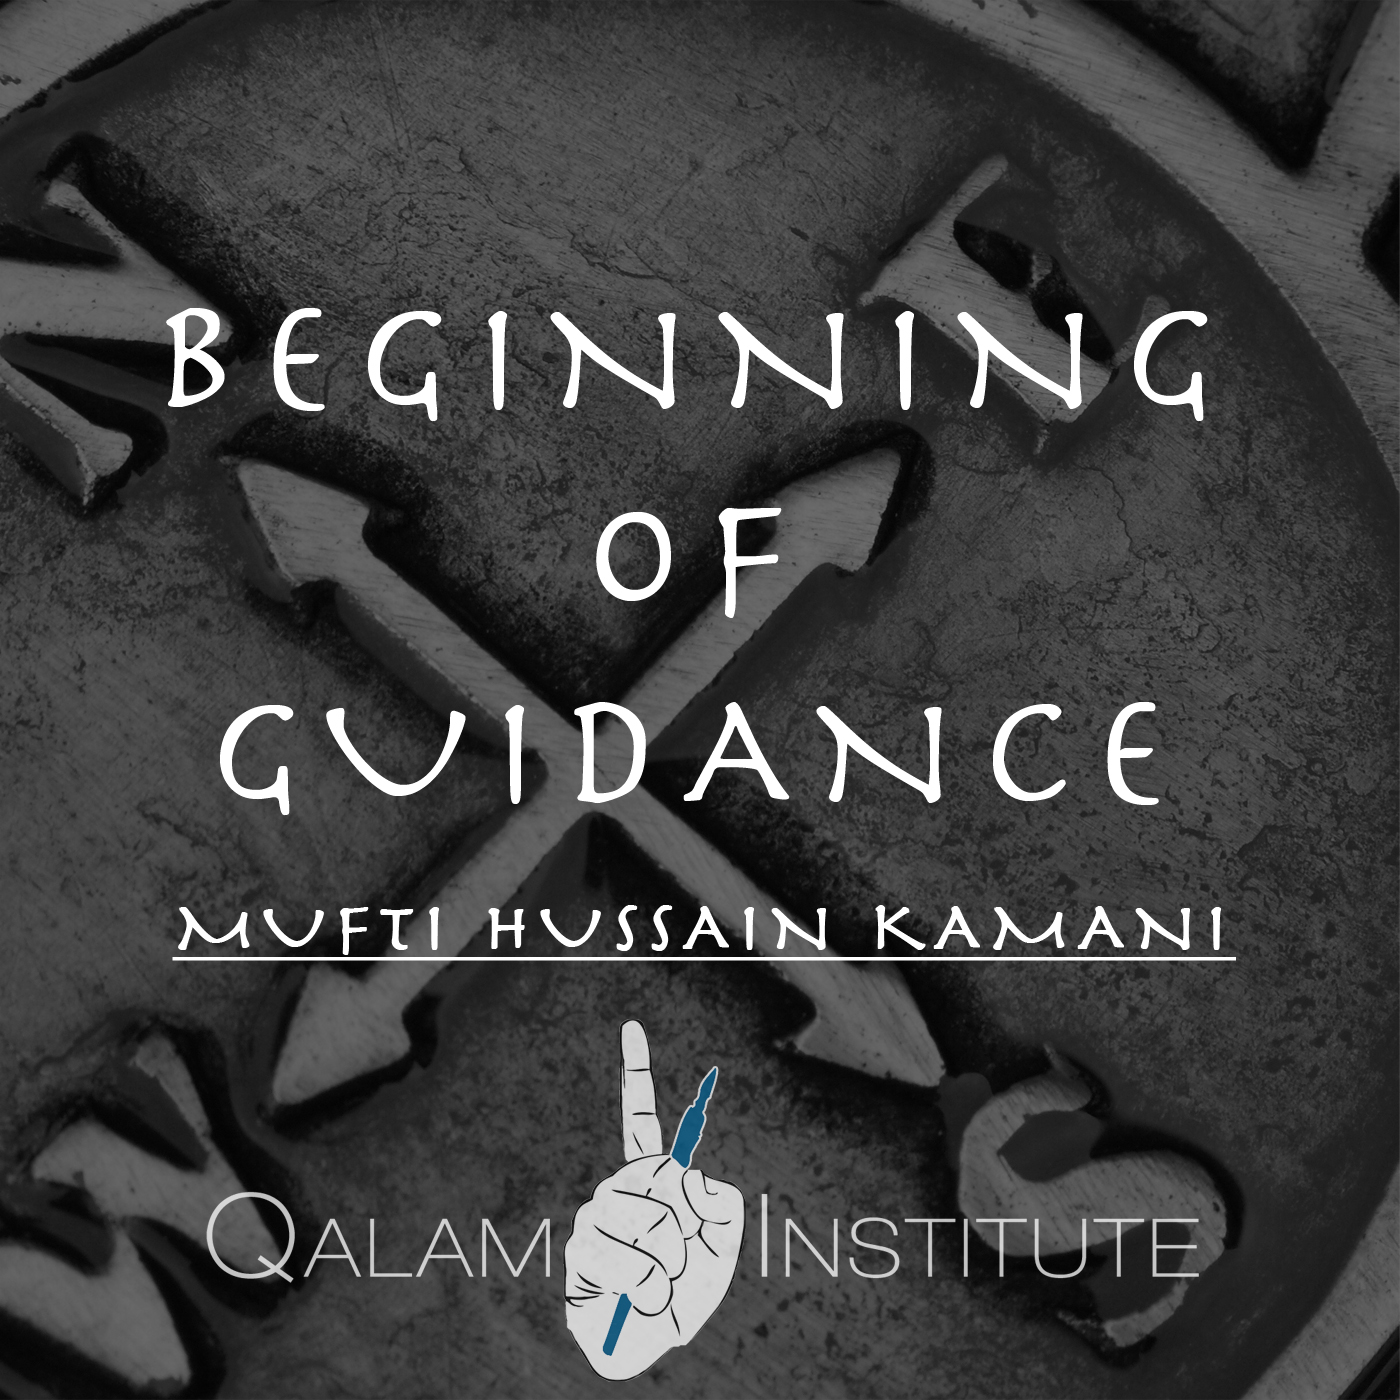 The Beginning of Guidance – The Etiquette of The Acquaintances